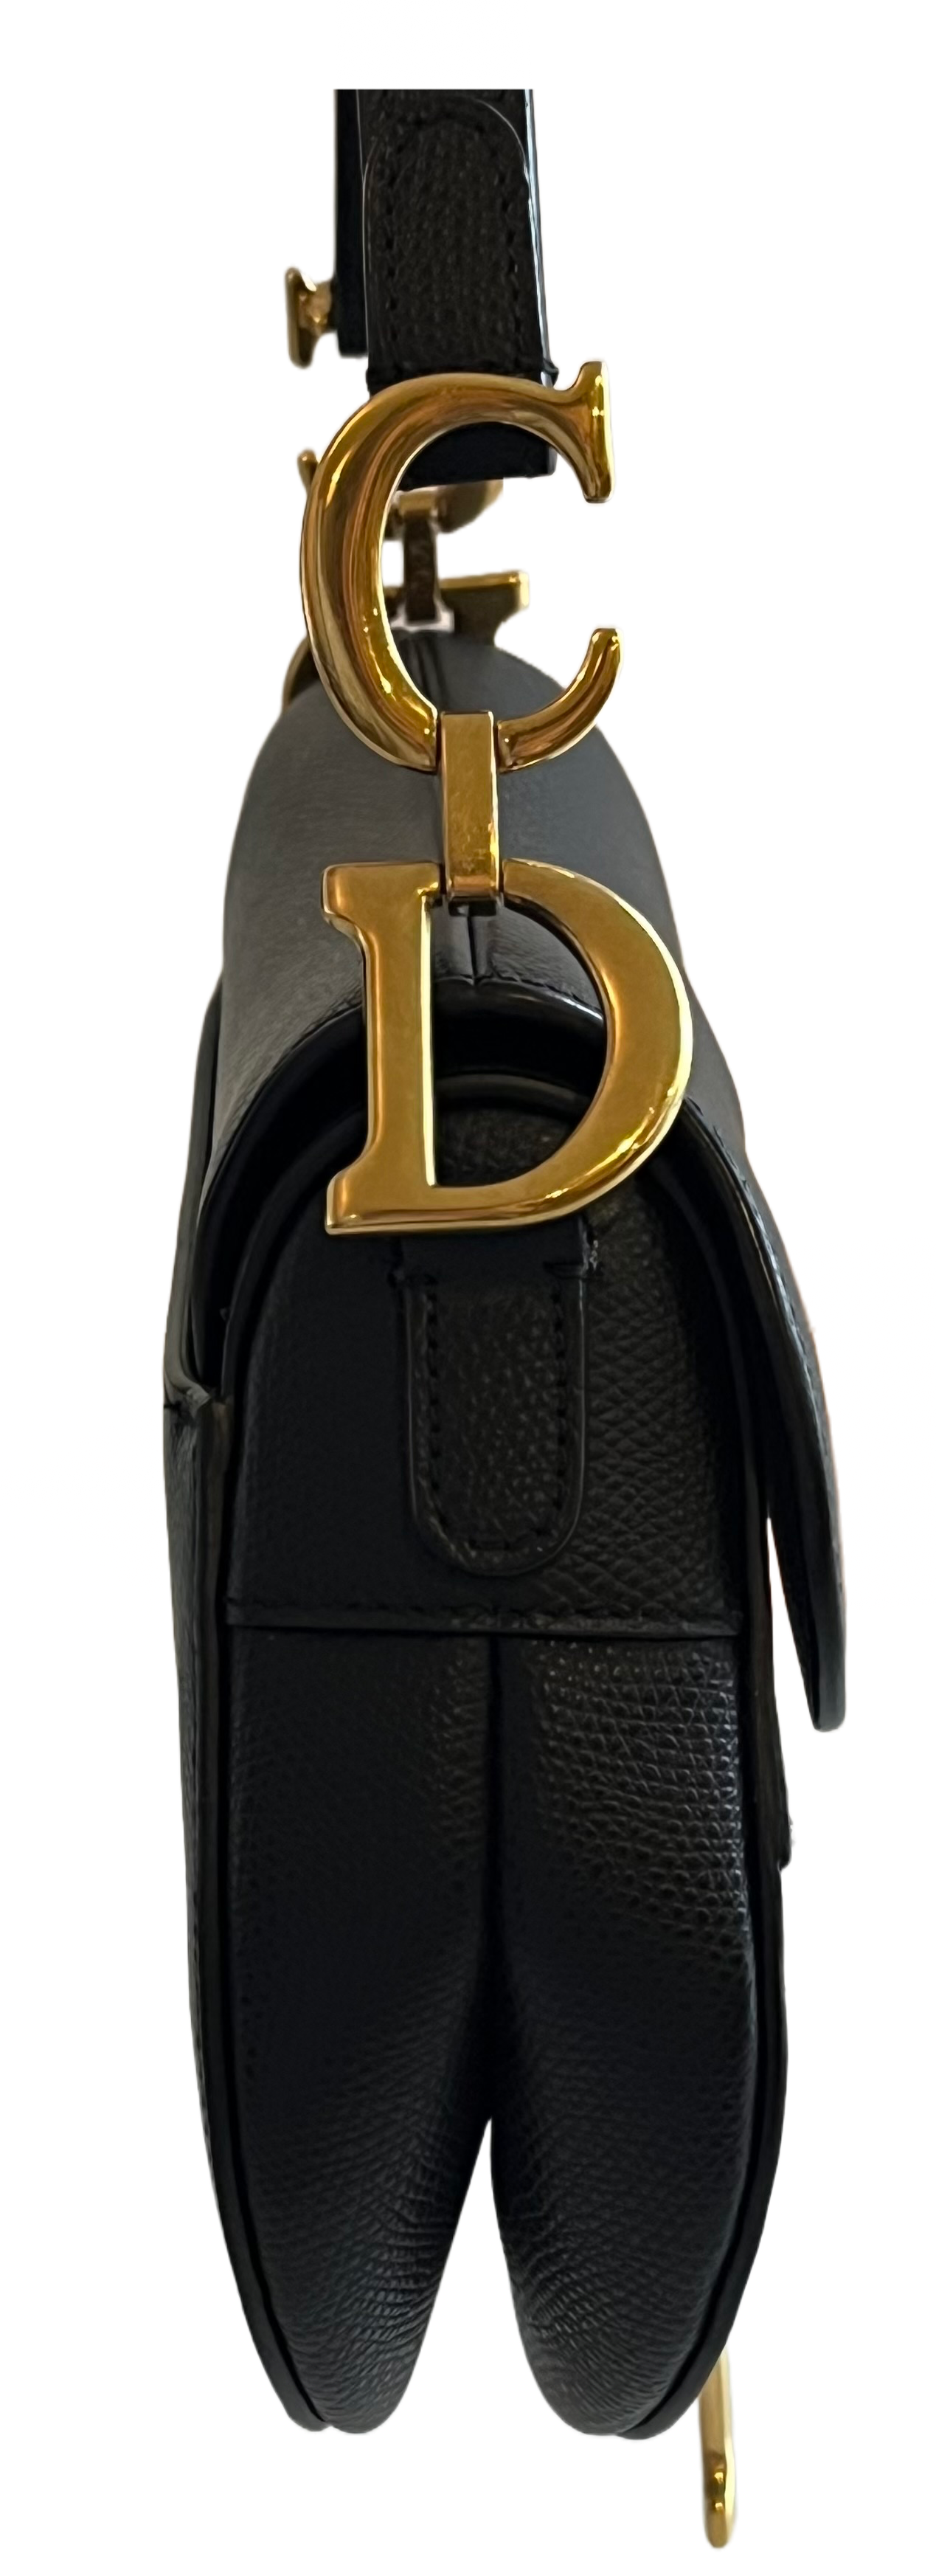 Dior Saddle Bag With Strap Black Grained Leather  Used But In Good  Condition  eBay